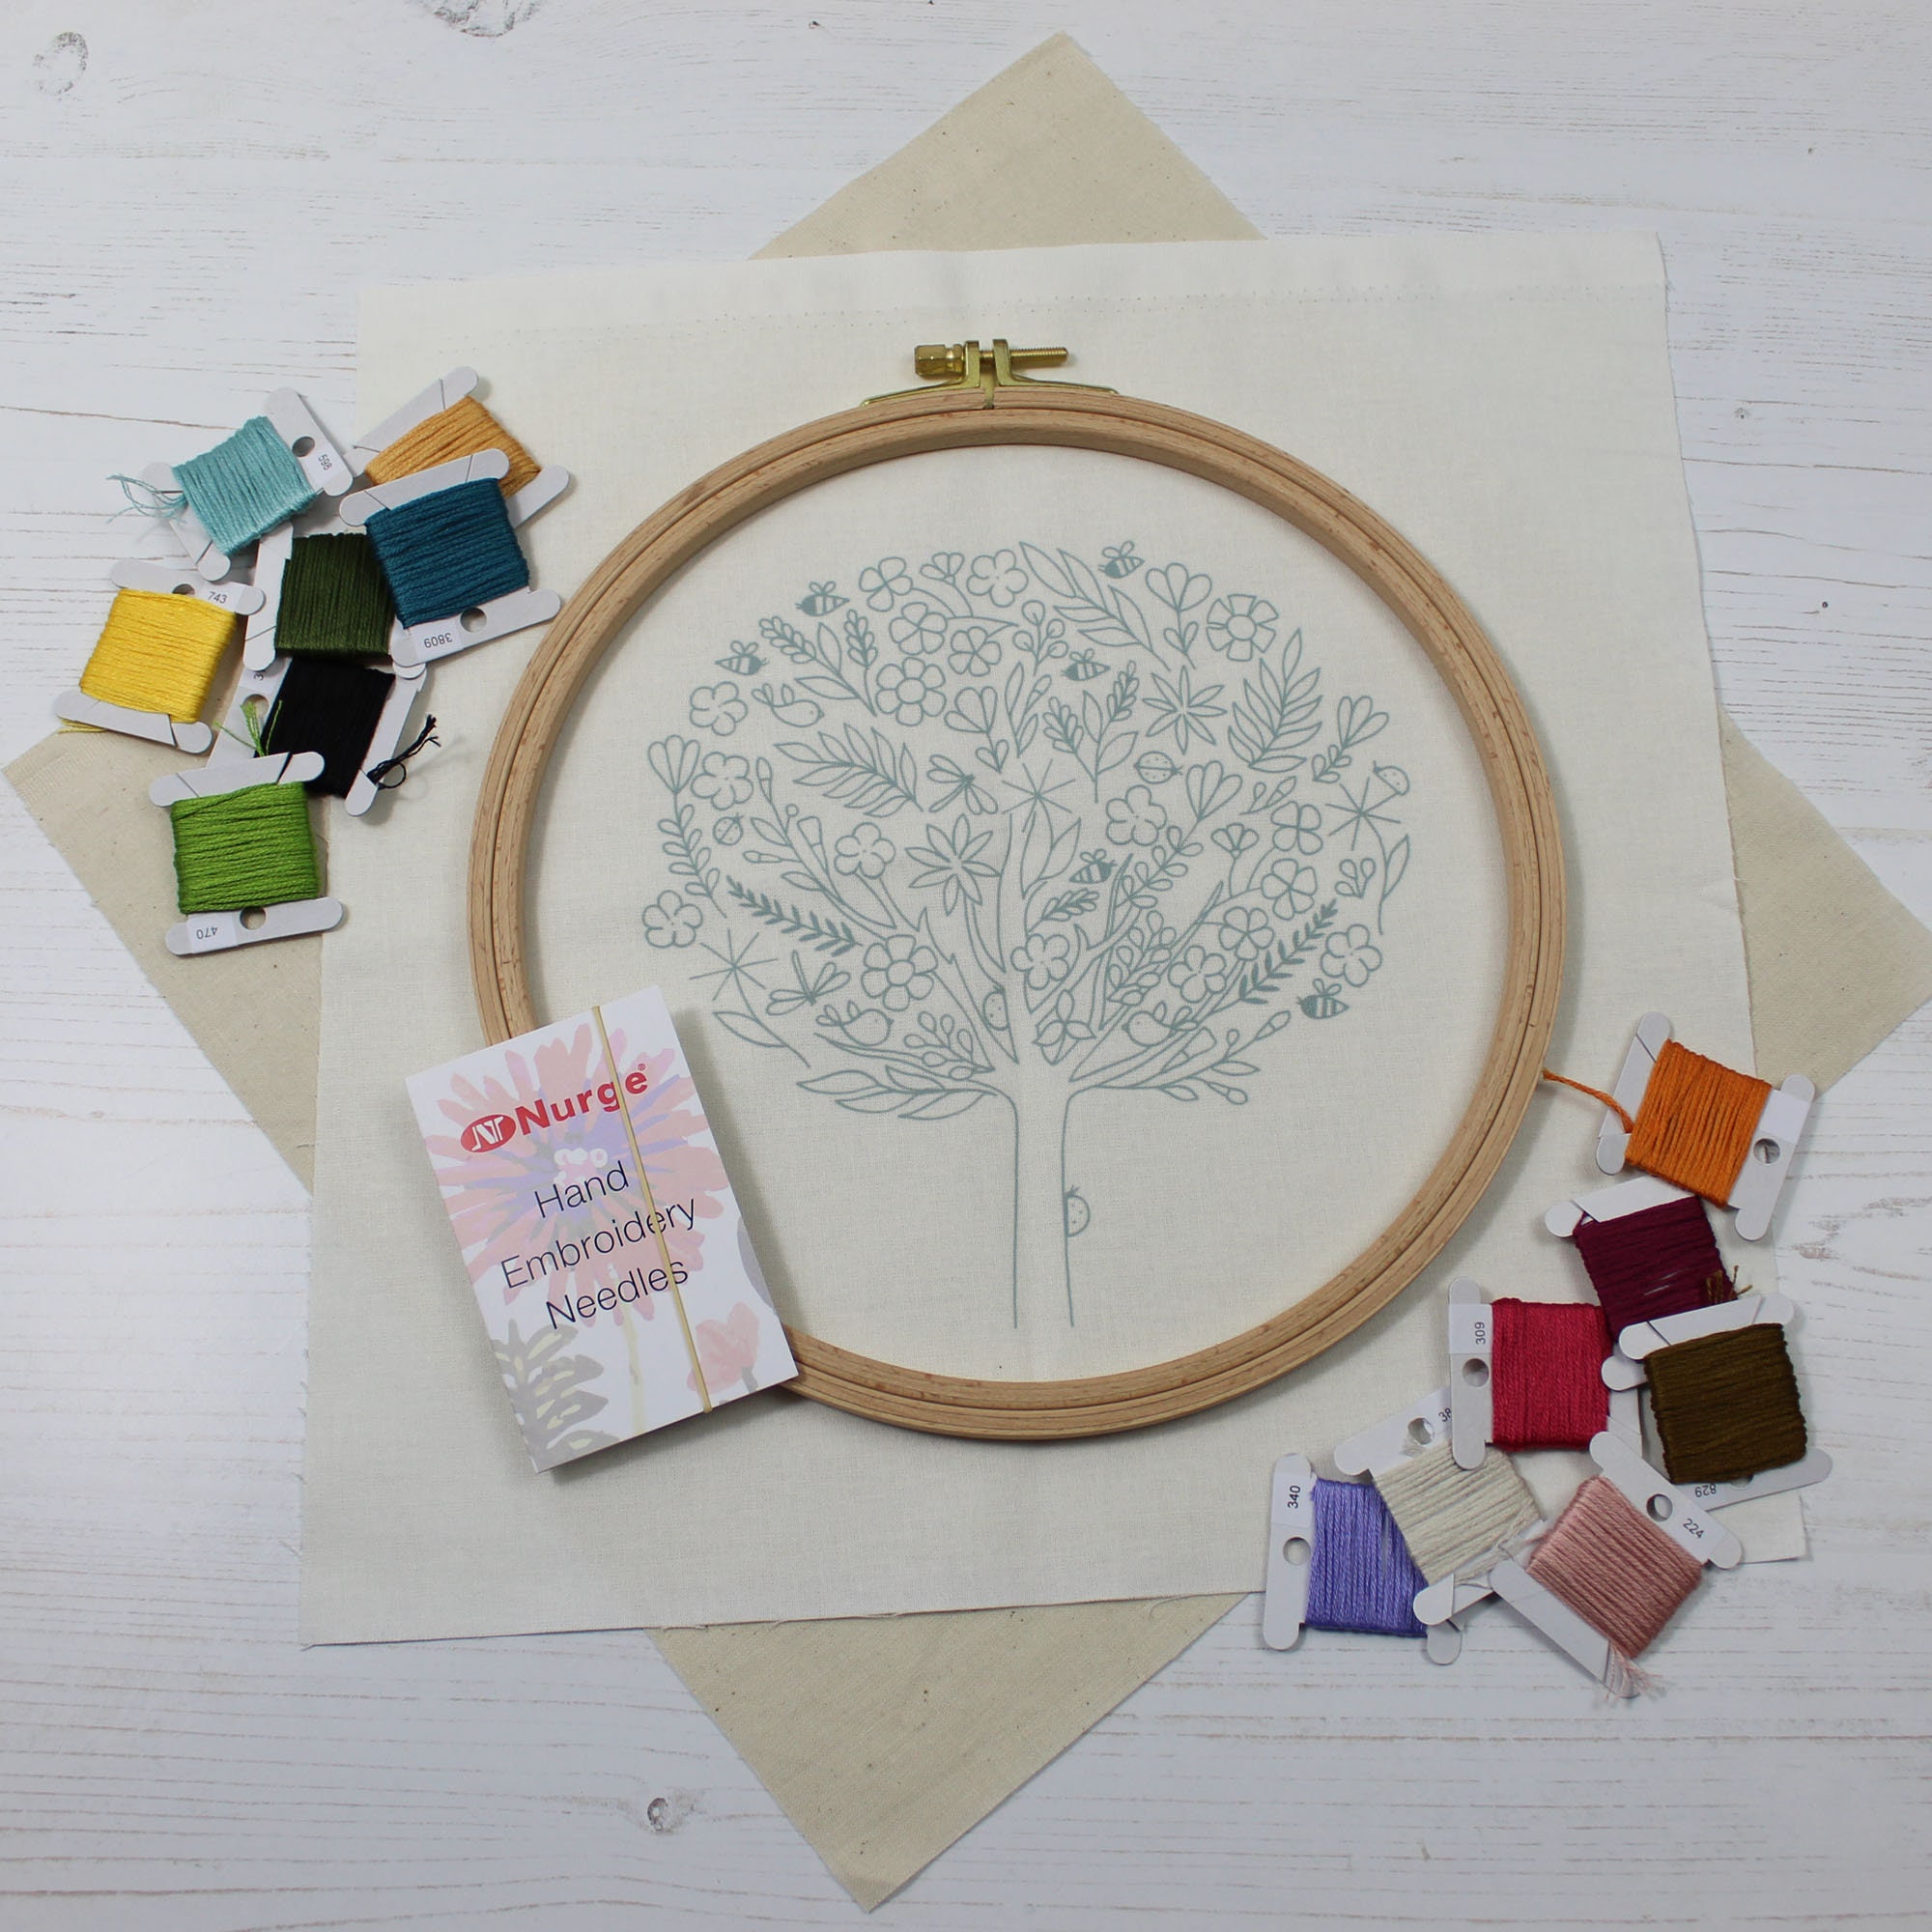 Nurge Wooden Embroidery Ring Cross Stitch Hoop in 5 Sizes 8mm